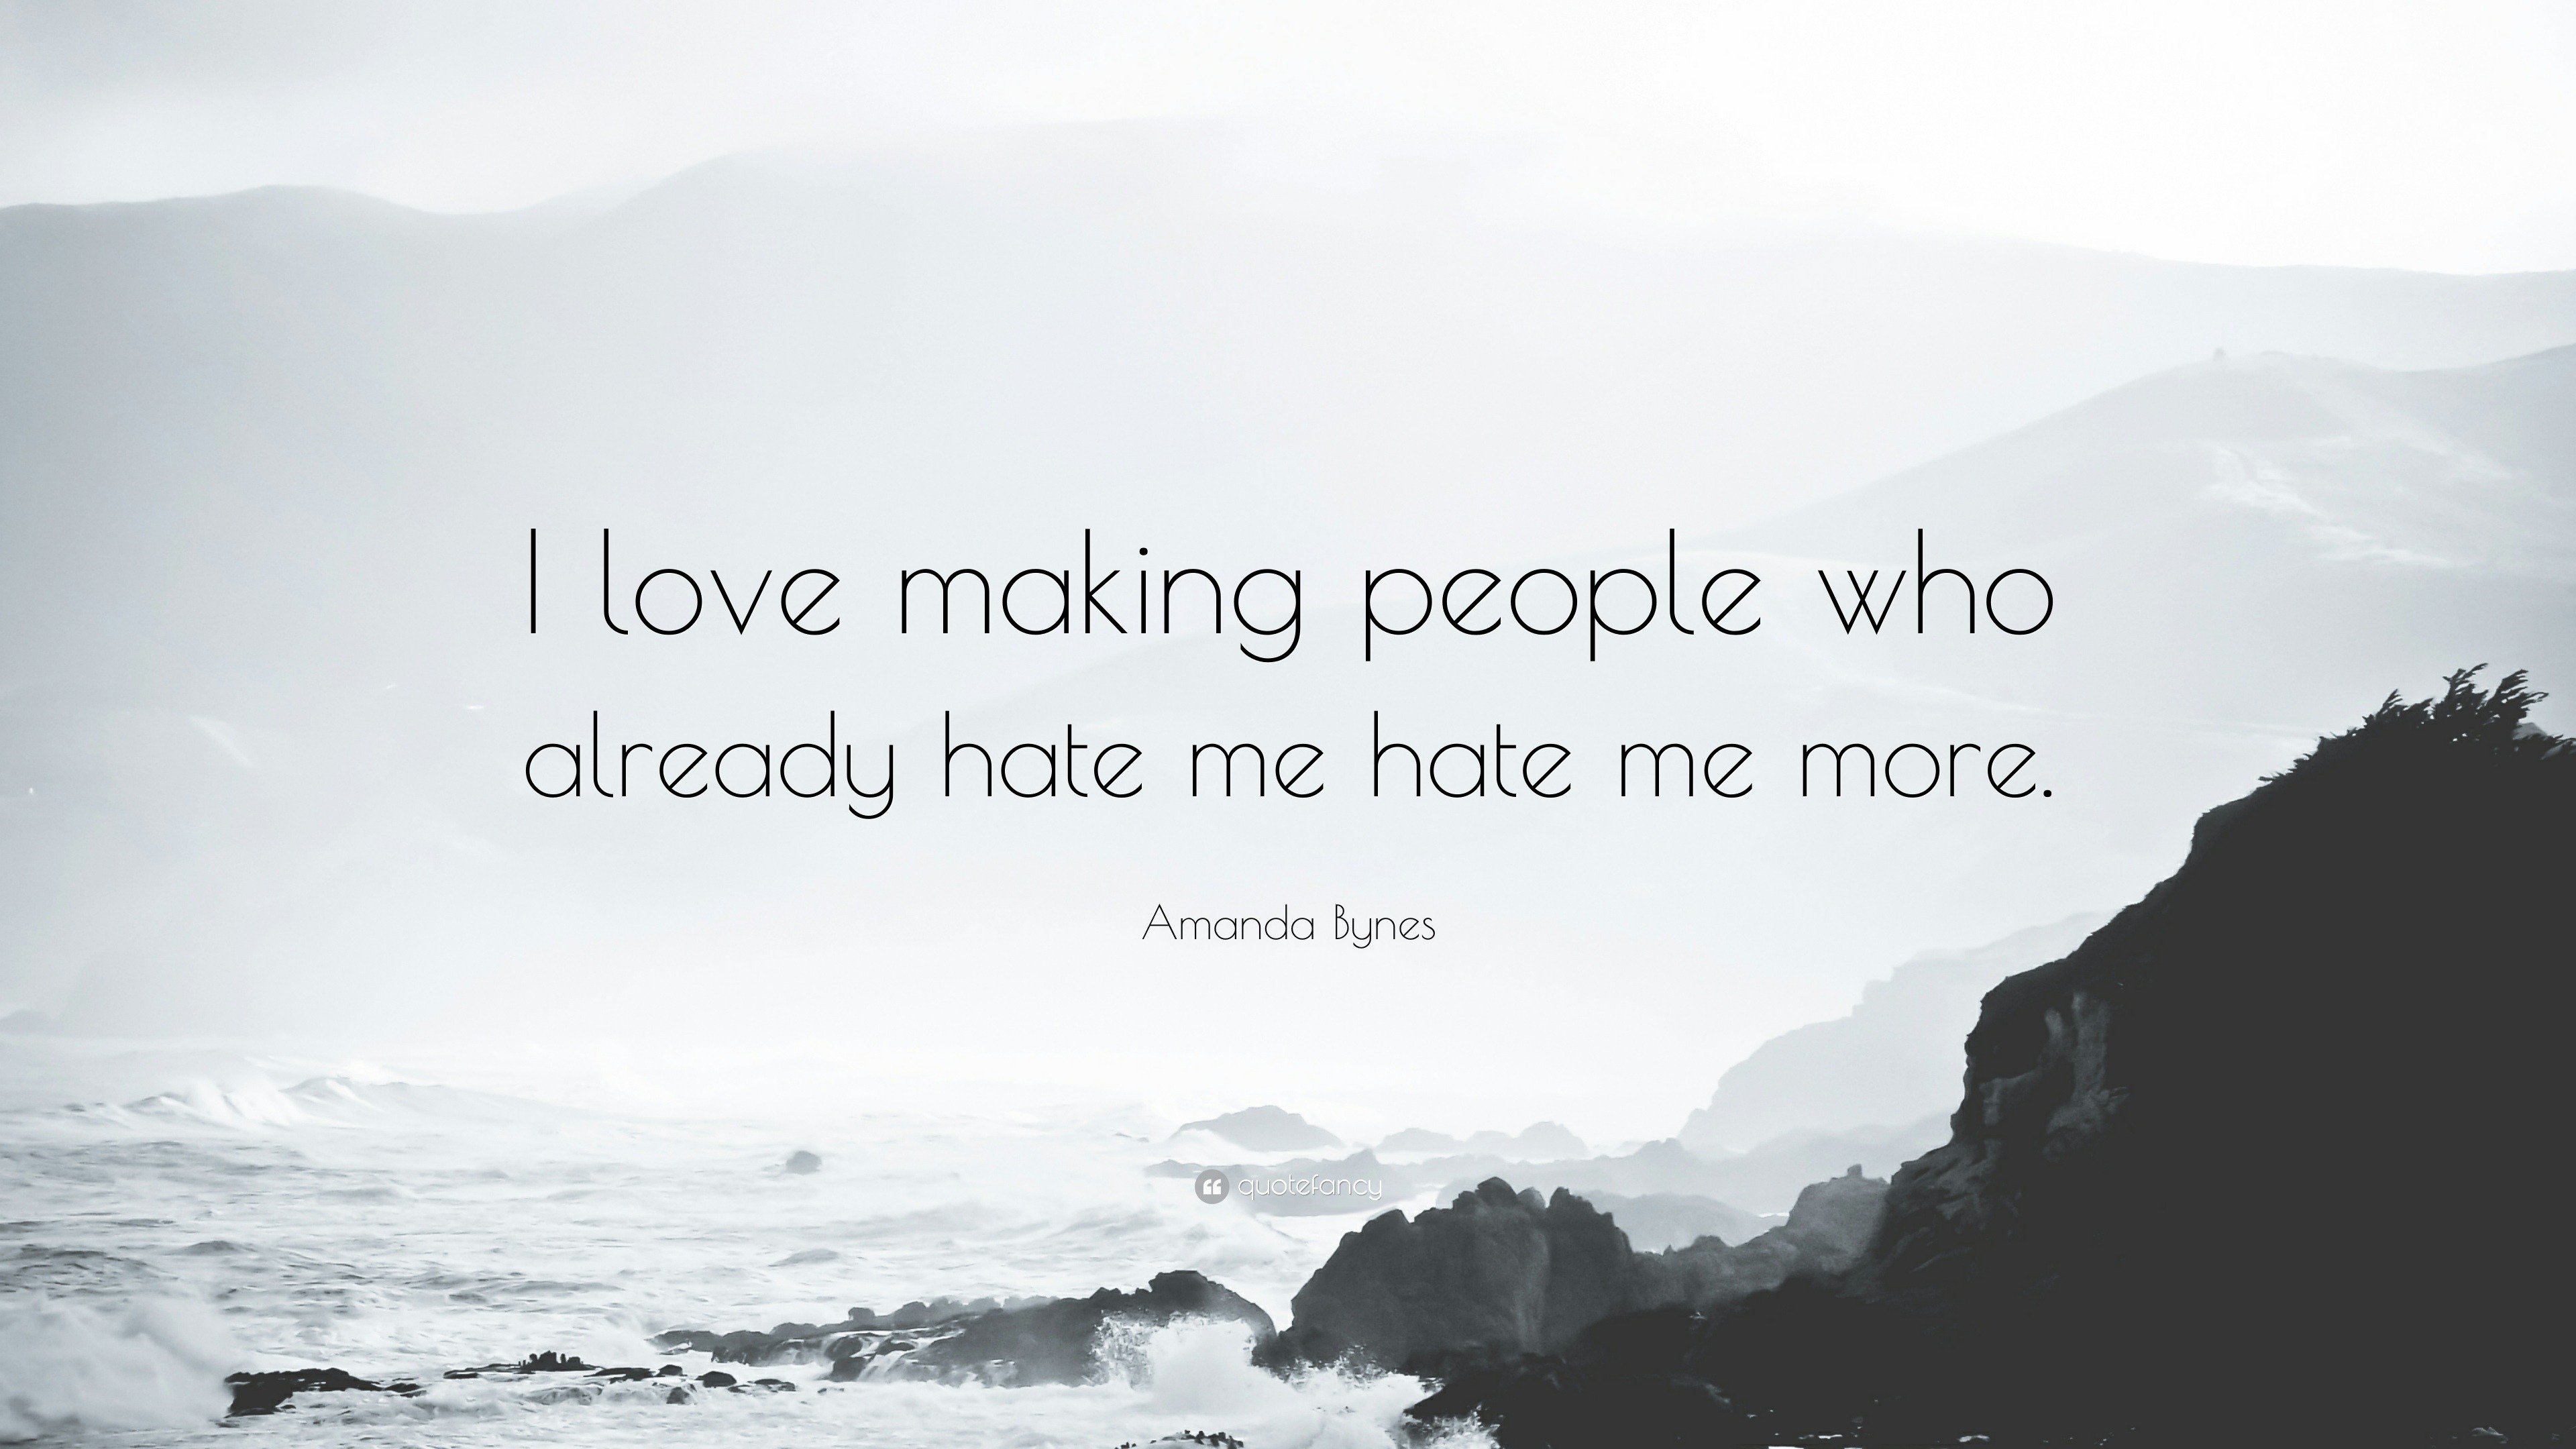 Amanda Bynes Quote “I love making people who already hate me hate me more